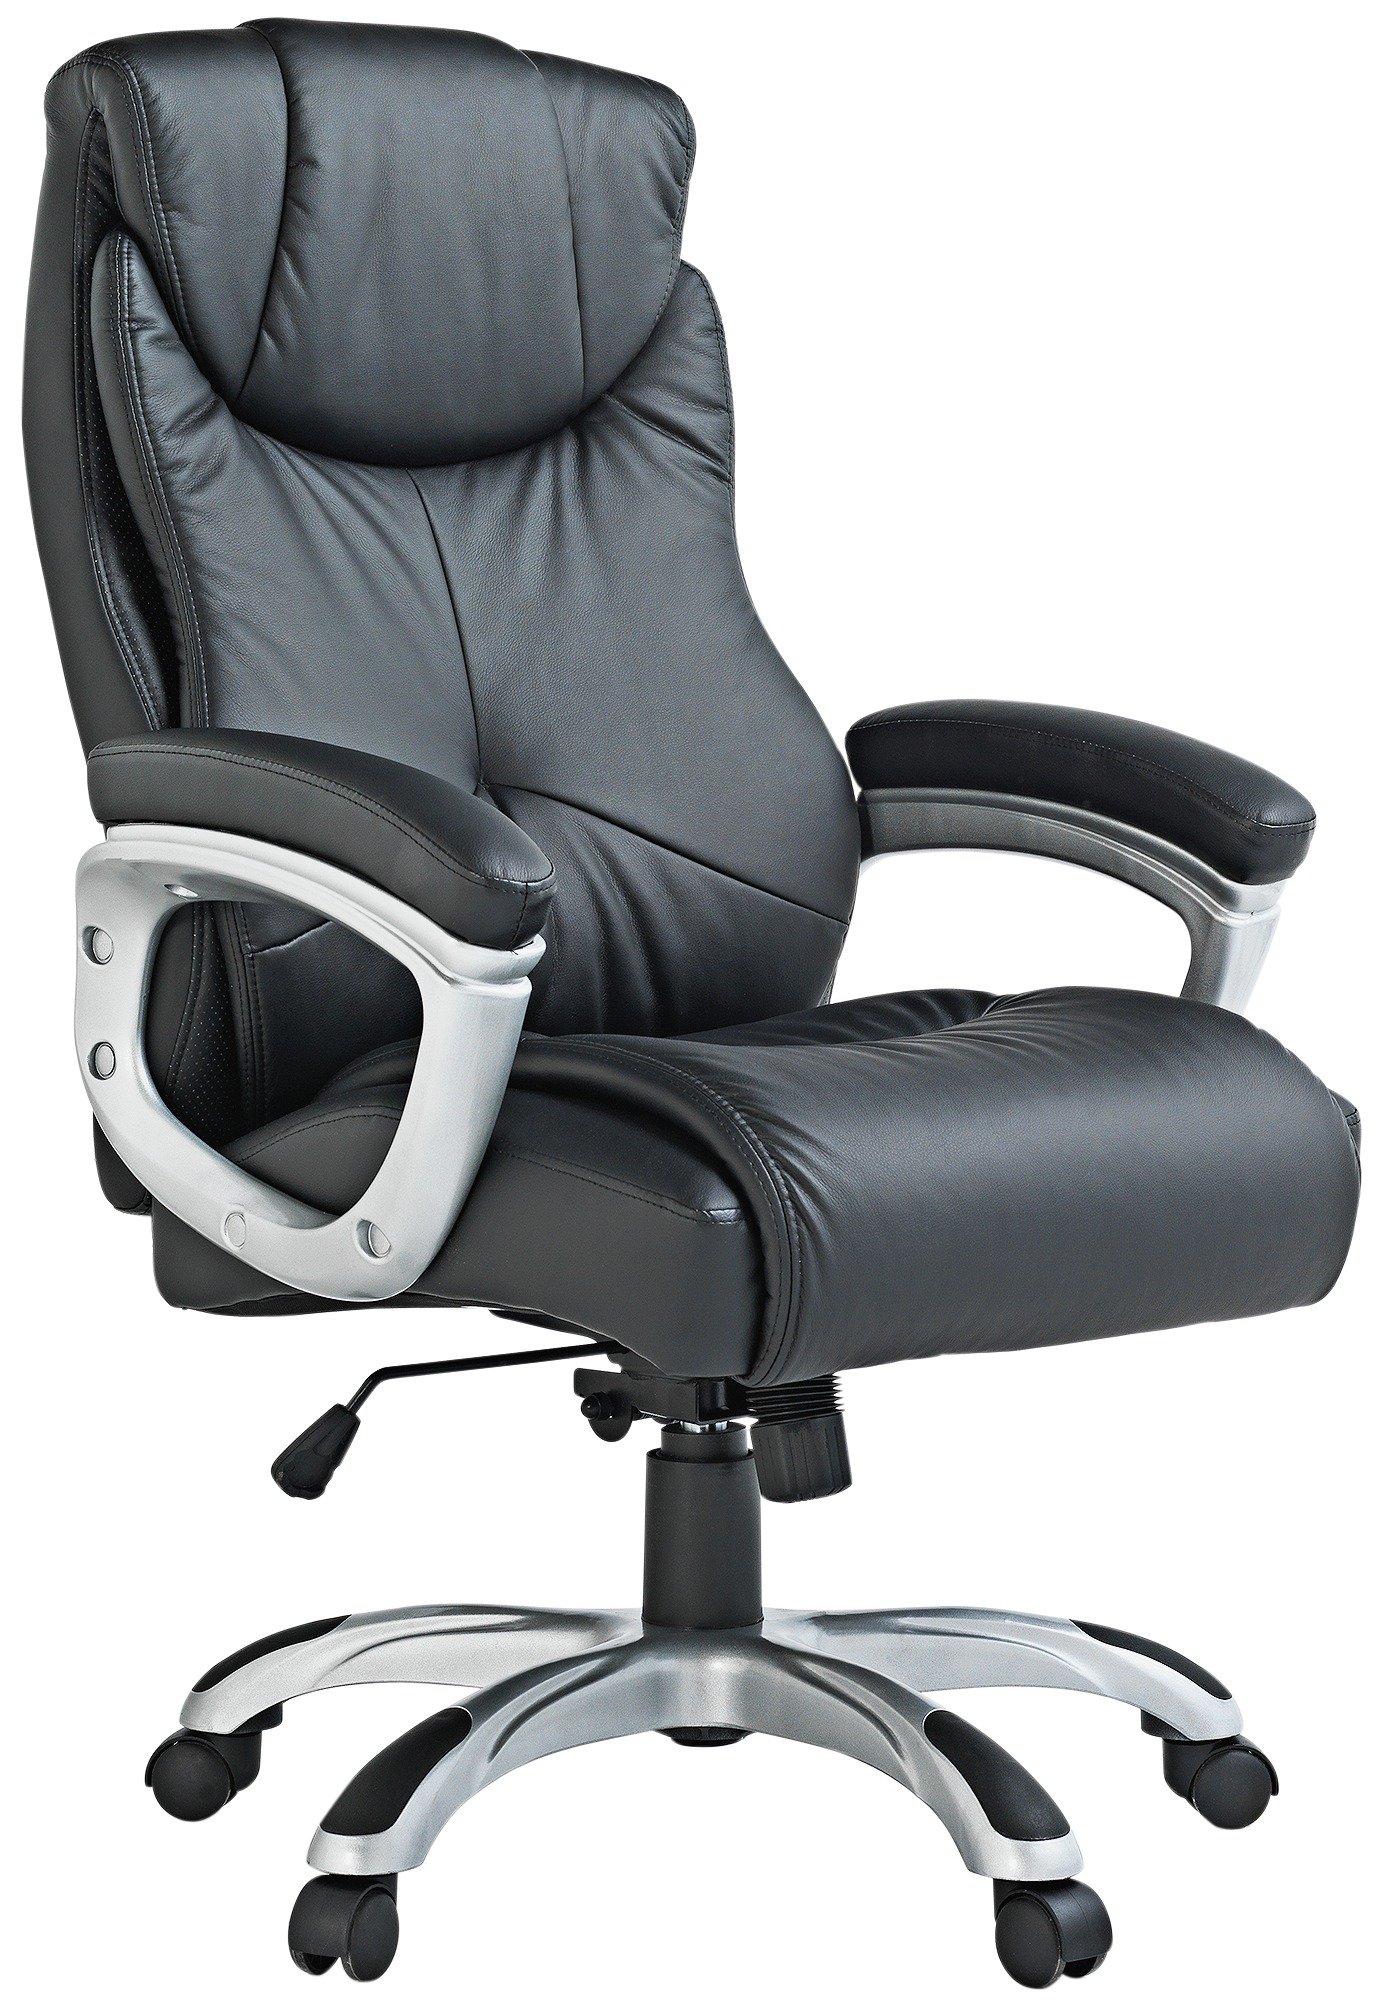 X-Rocker Executive Height Adjustable - Office Chair Review